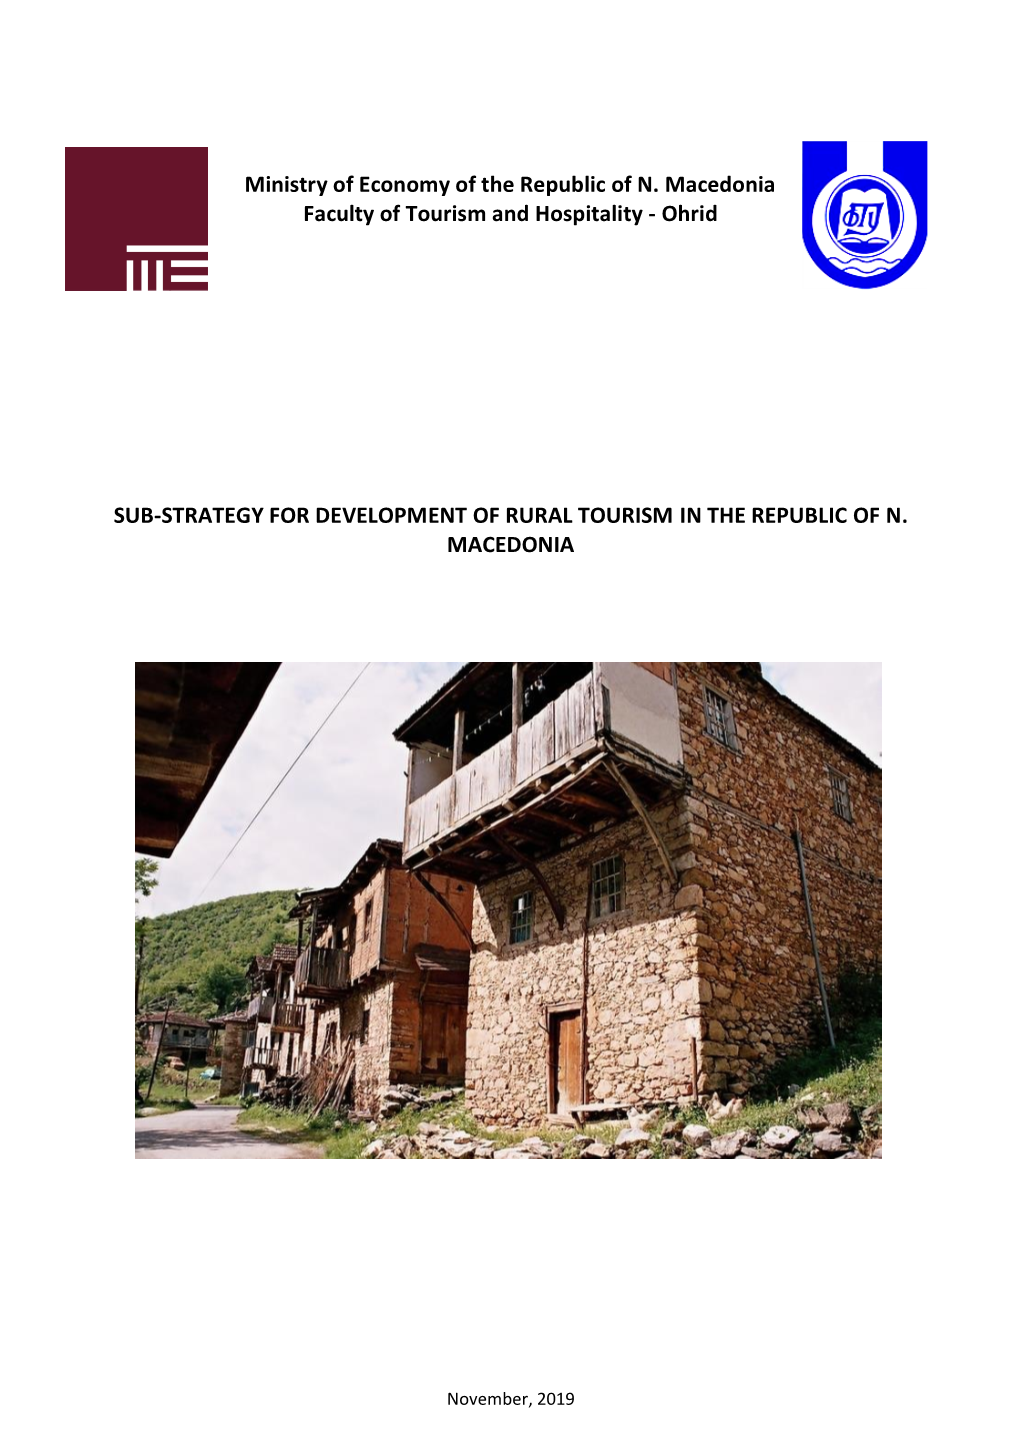 Ministry of Economy of the Republic of N. Macedonia Faculty of Tourism and Hospitality - Ohrid